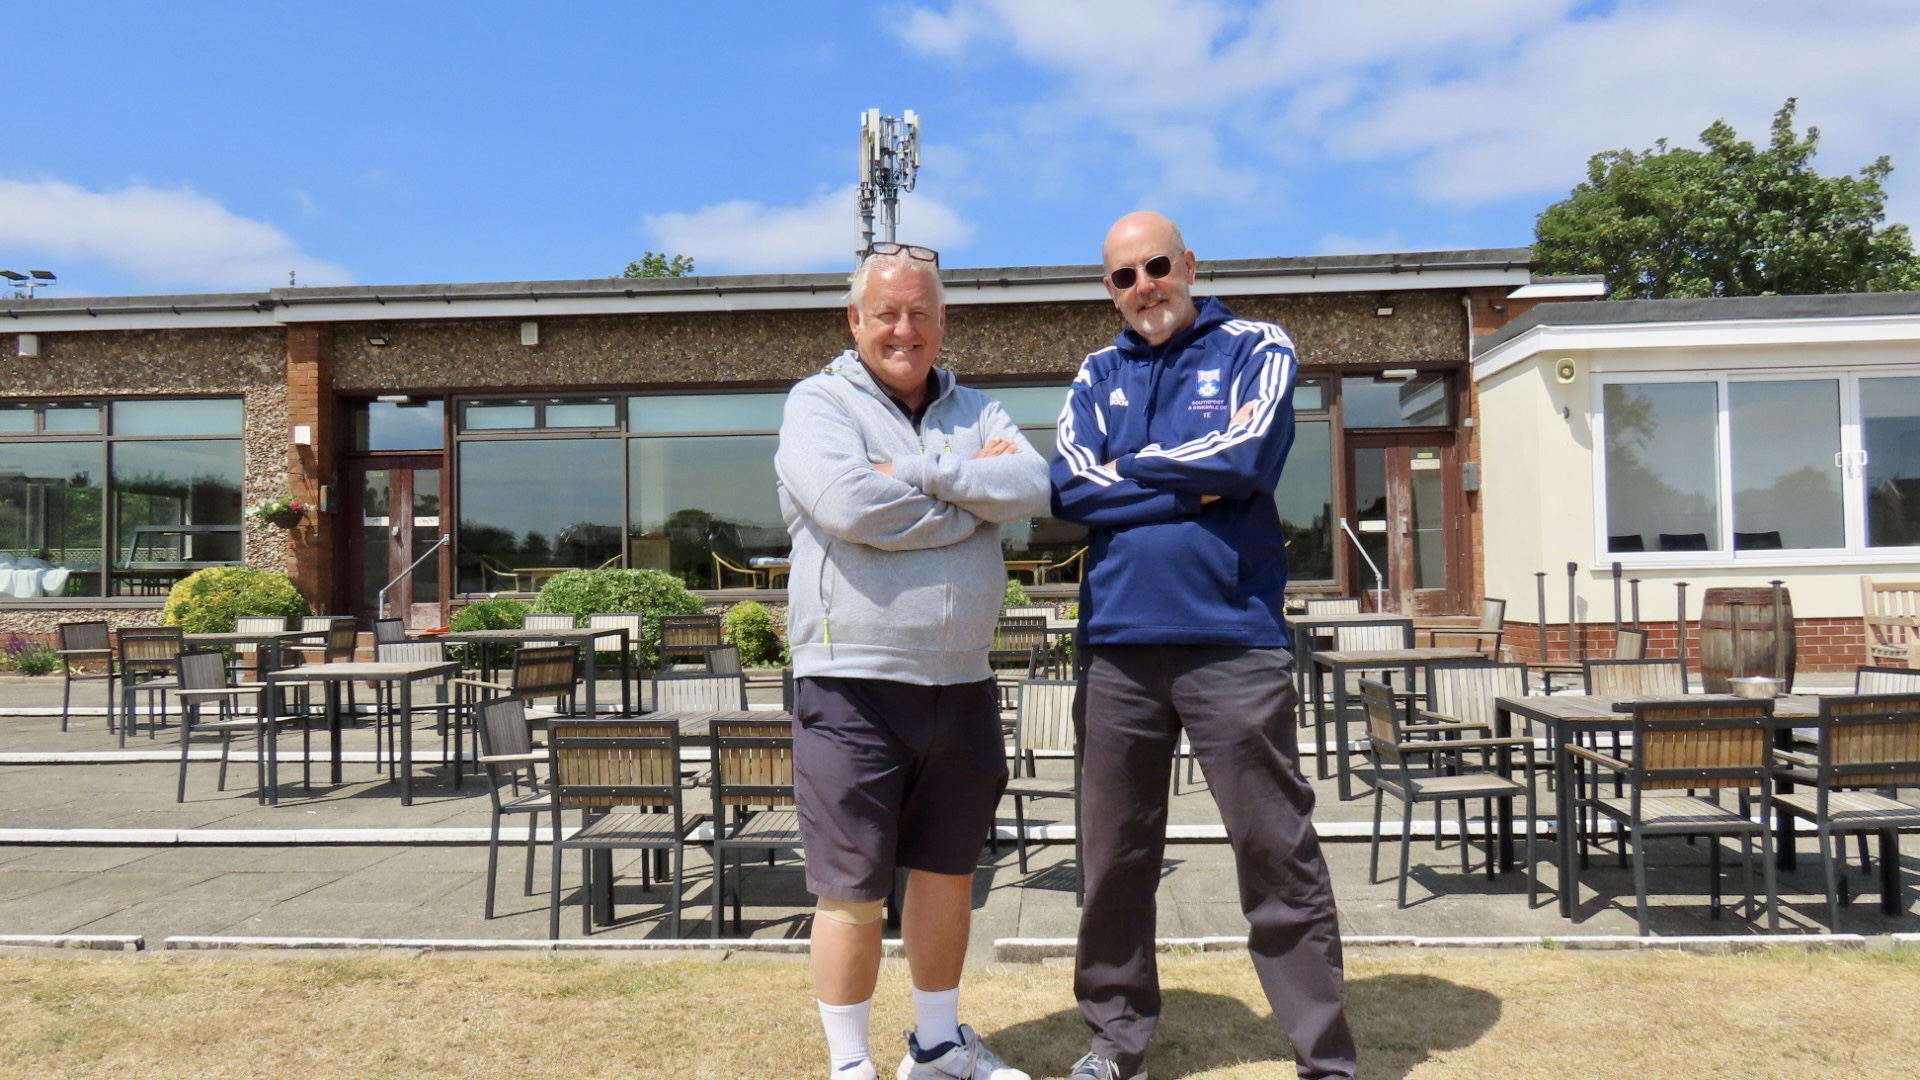 Southport and Birkdale Sports Club on Trafalgar Road in Southport. Cricket Club Chairman Andrew Carney (left) with Sports Club Chairman Tony Elwood. Photo by Andrew Brown Stand Up For Southport